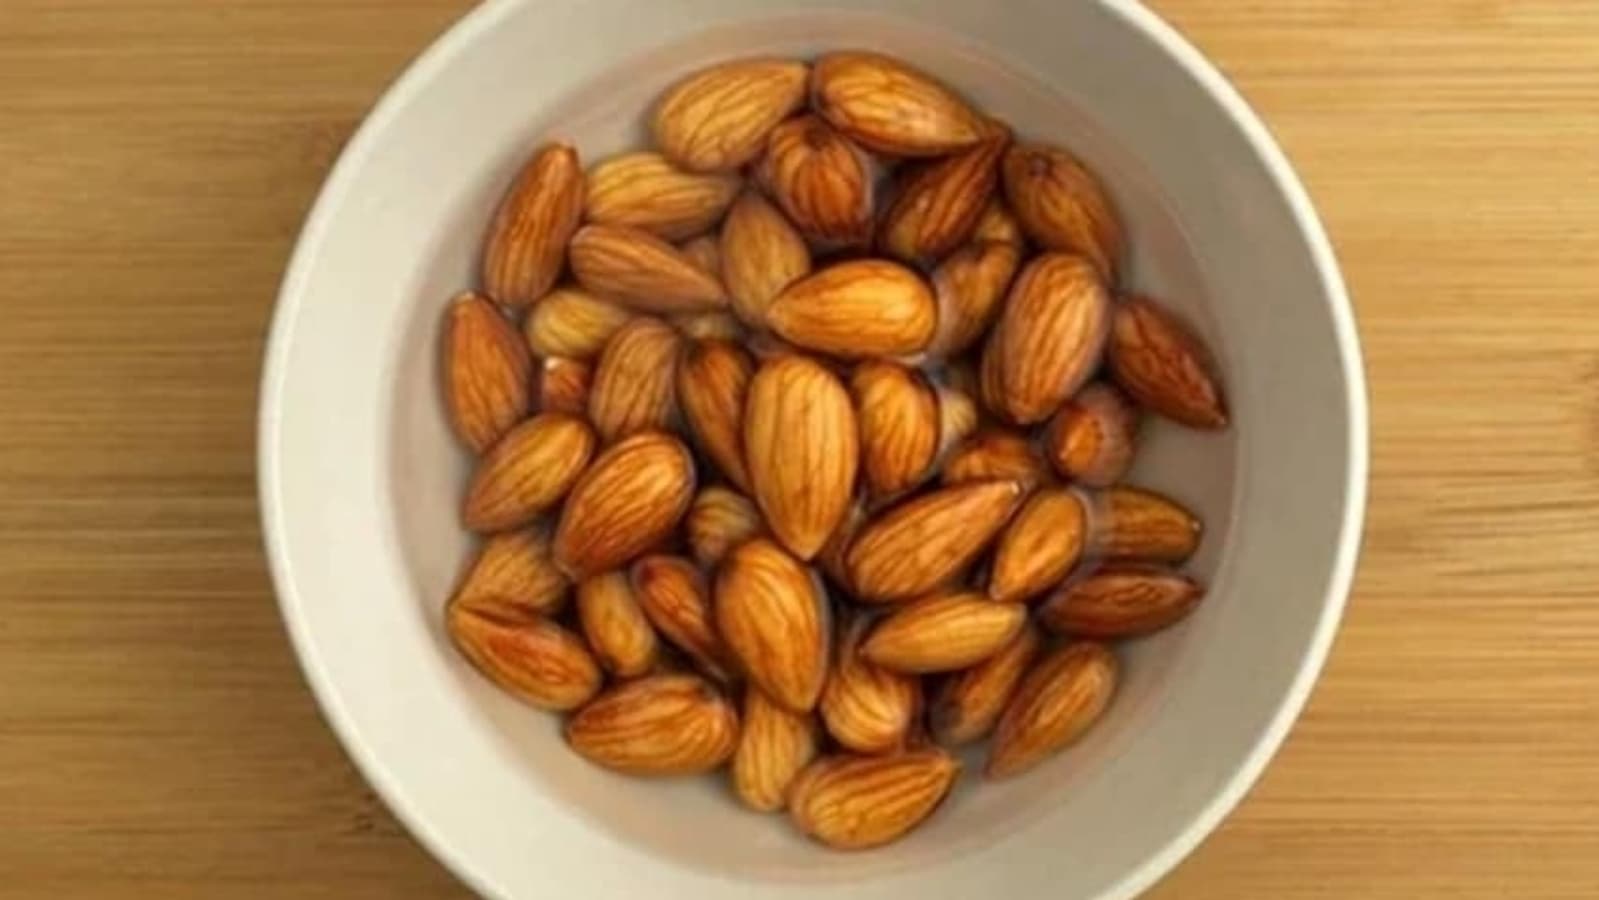 Is It Healthy to Eat Nuts Every Day? - Effects of Too Many Nuts